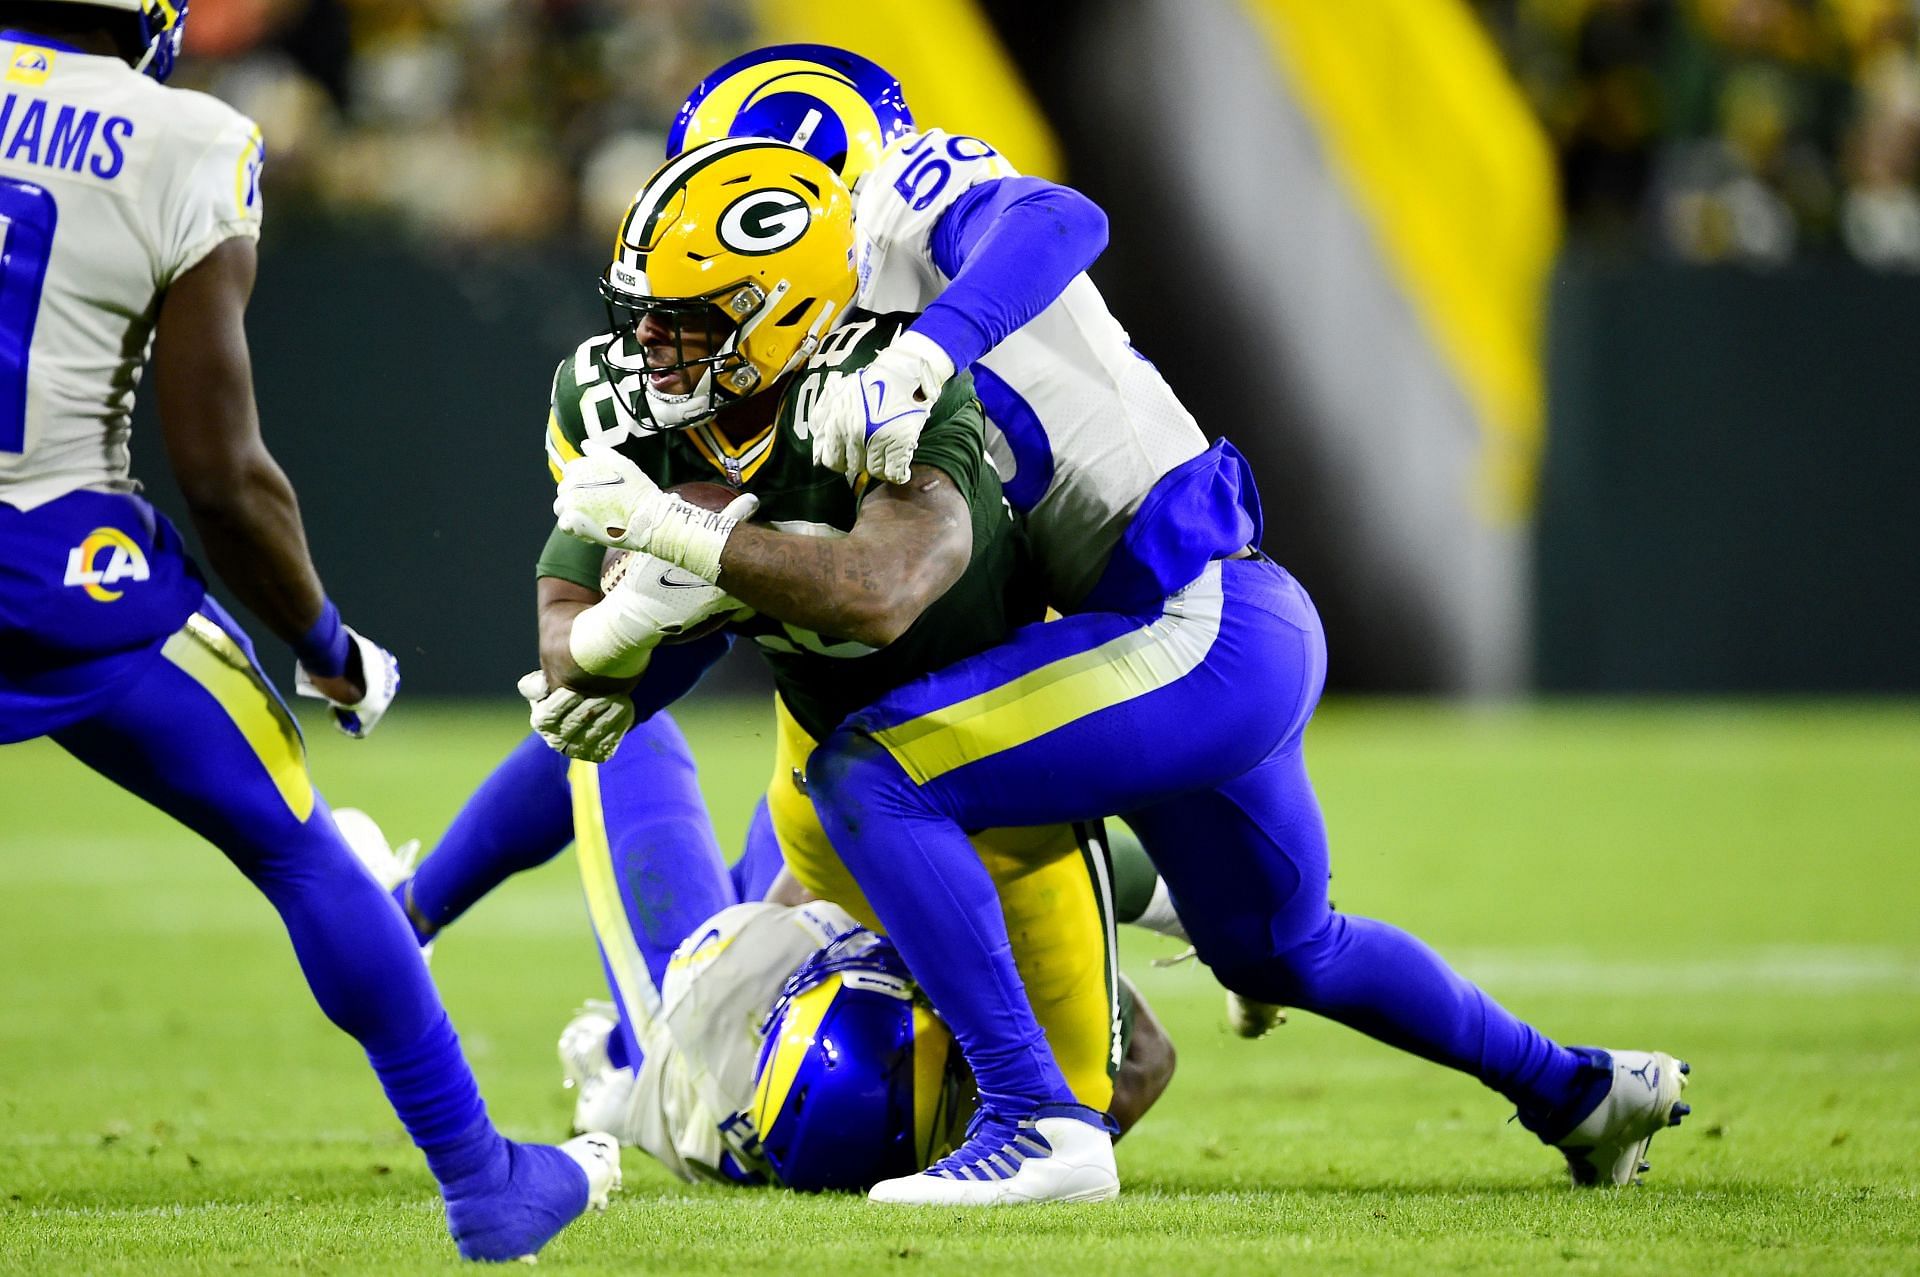 The Rams and Packers collide in late December in a juicy Monday night matchup